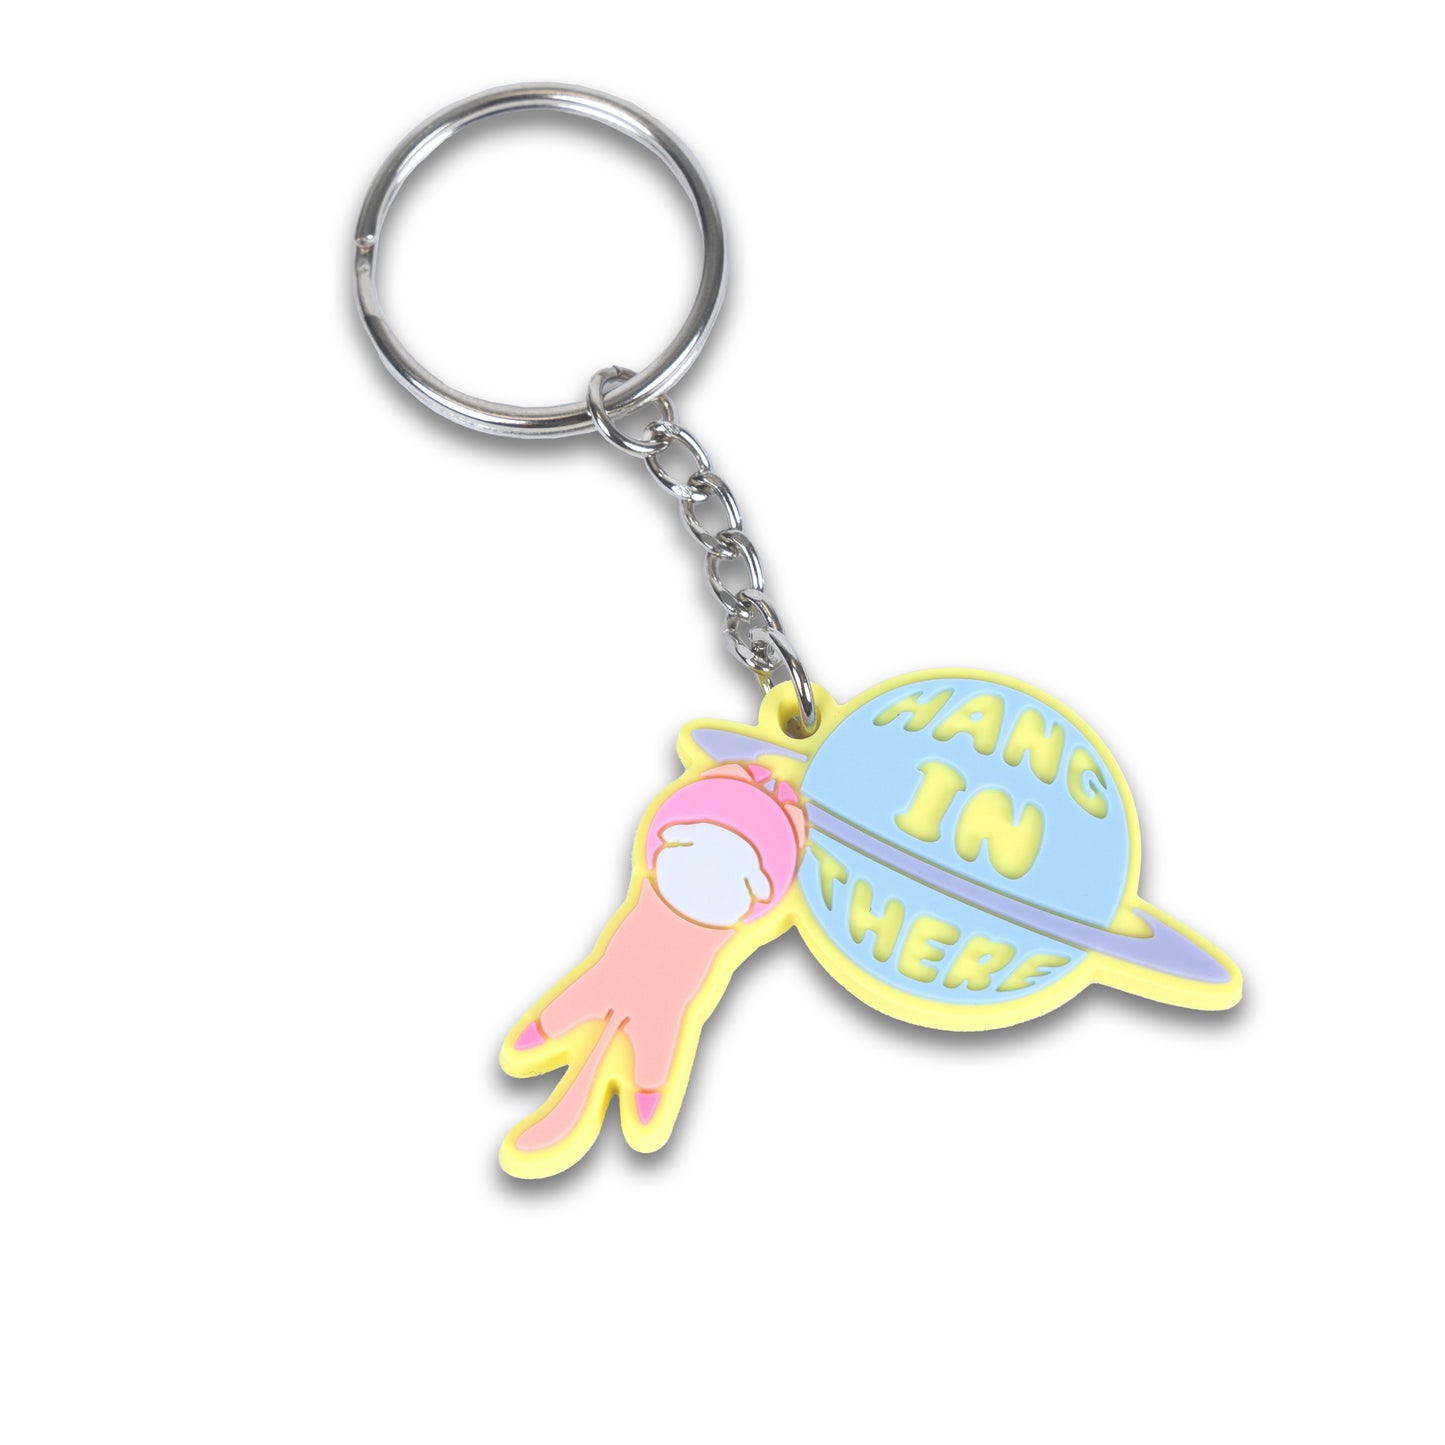 Photograph of Cute Cat Astronaut (Catstronaut) PVC Keychain, hanging onto a planet with cute phrase 'Hang In There'.